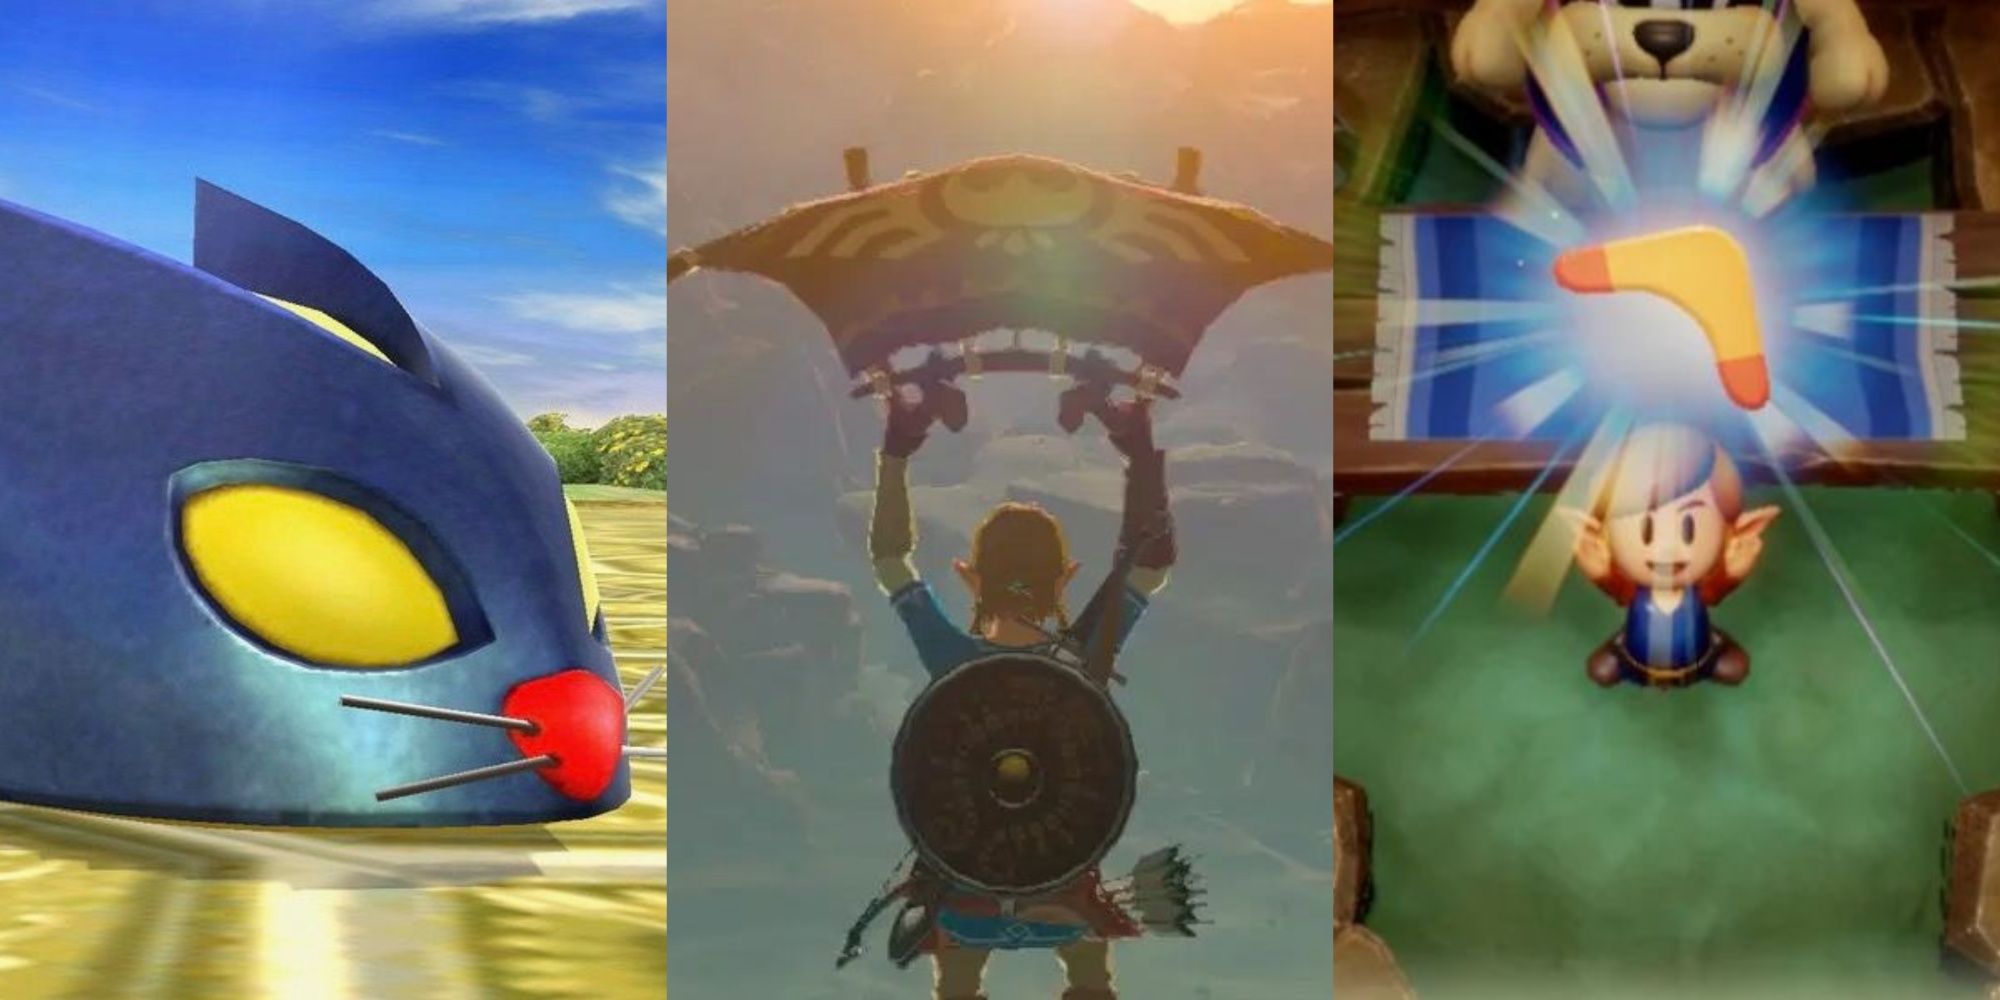 Split images of a bombchu, Link paragliding in Breath of the WIld, and Link receiving a Boomerang in Link's Awakening 2019.